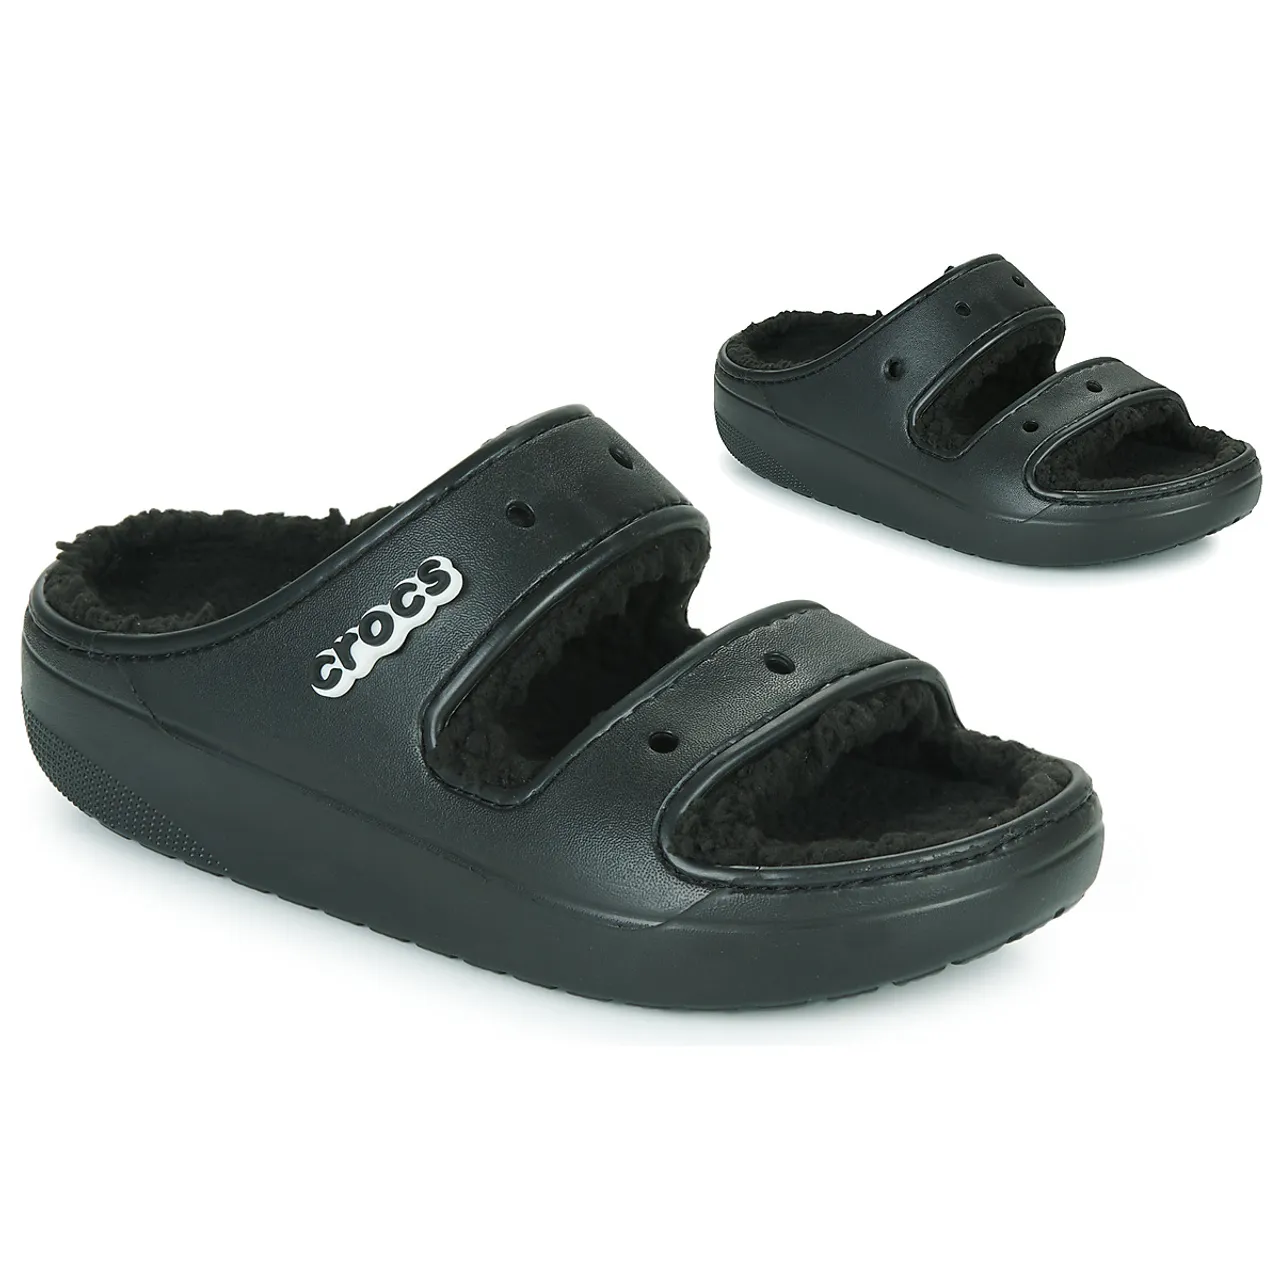 Crocs  CLASSIC COZZY SANDAL  women's Mules / Casual Shoes in Black